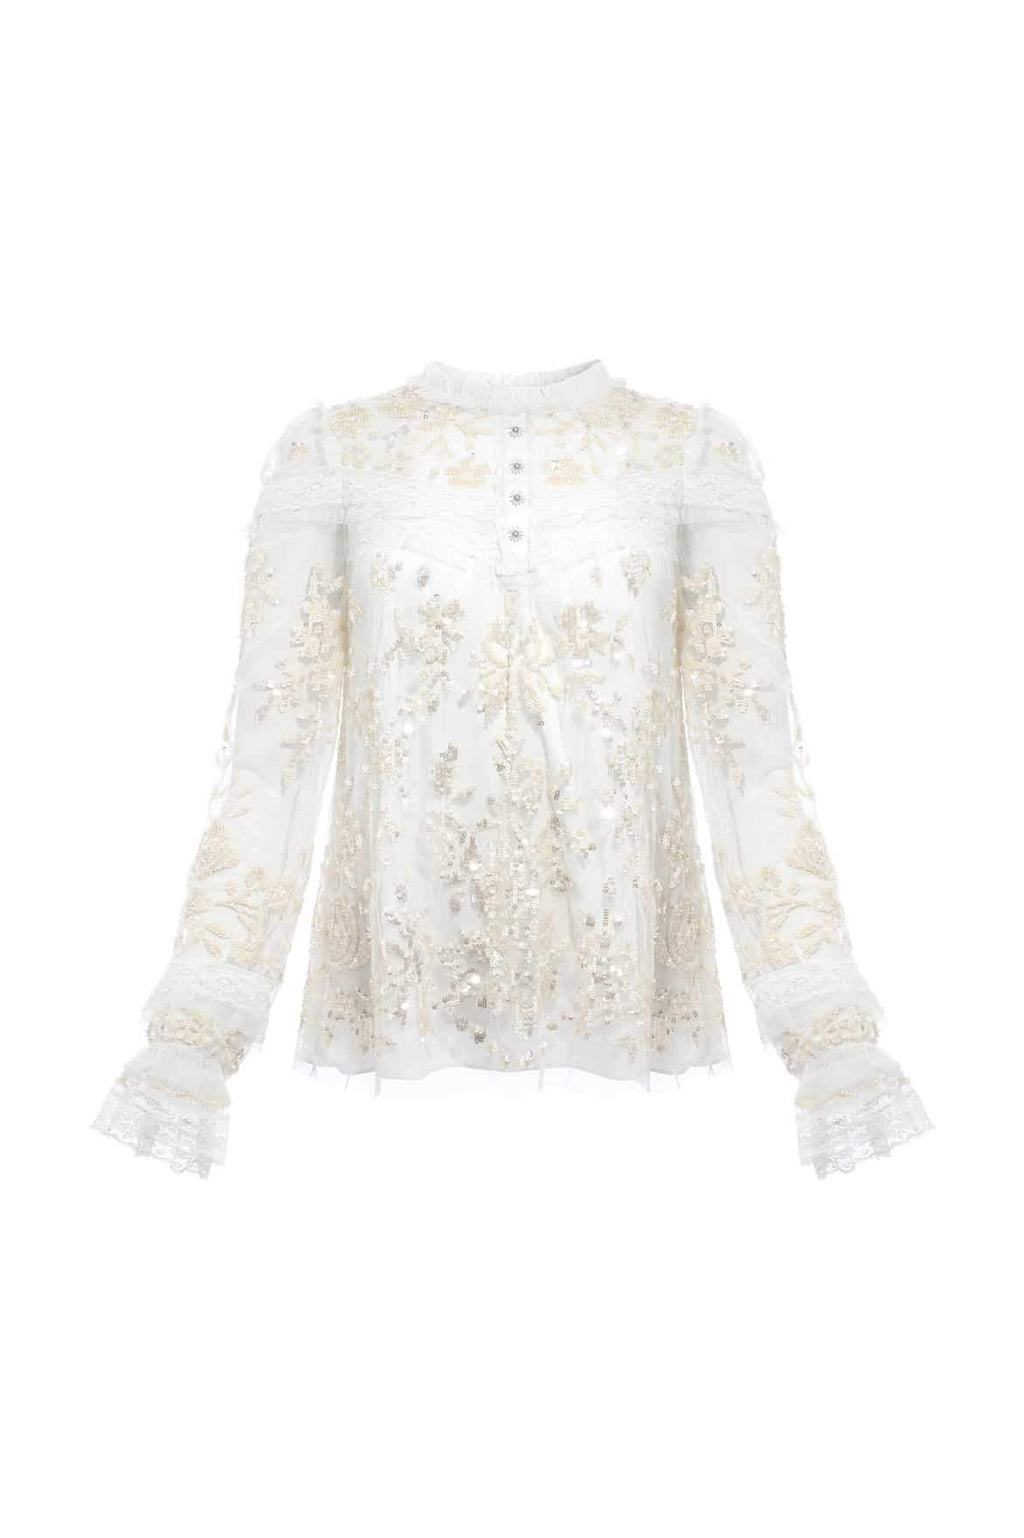 AW19 New Season Ava Blouse in Ivory.